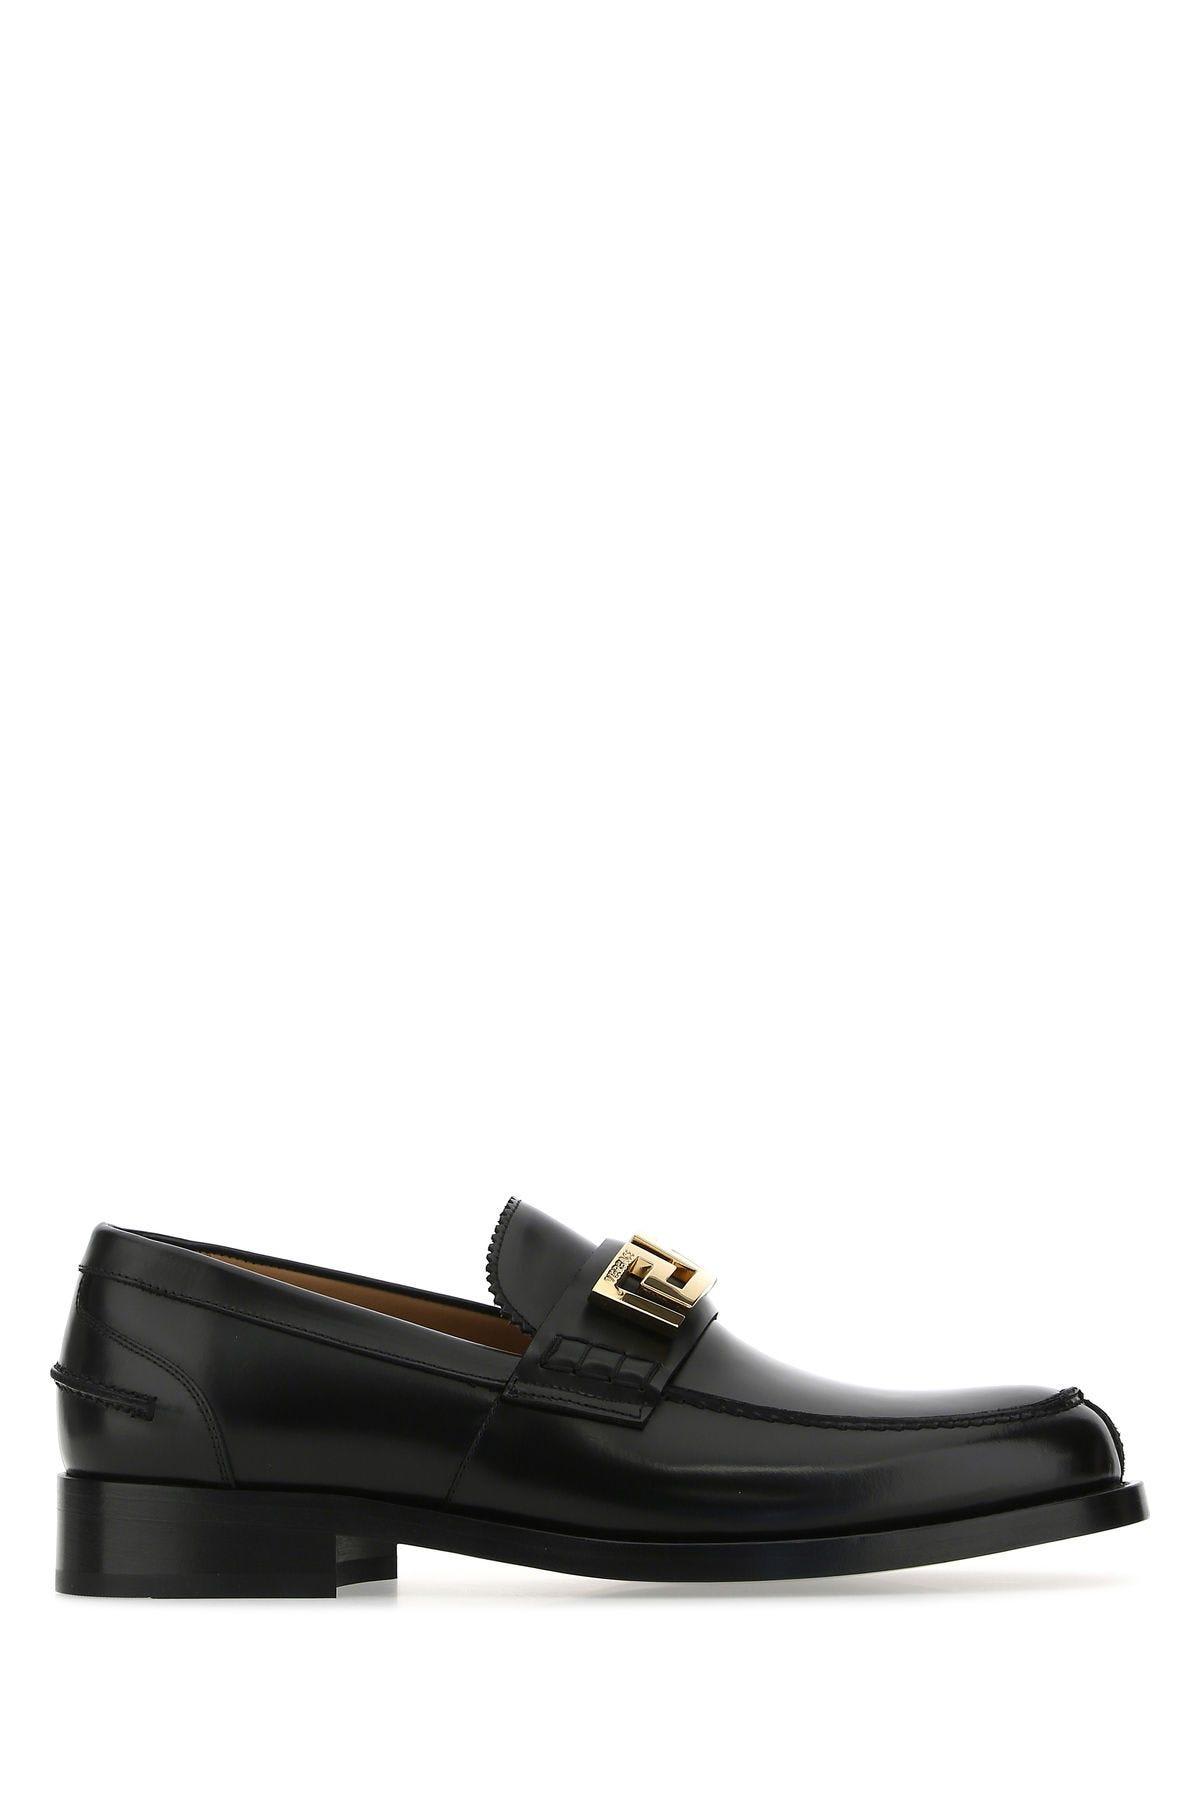 VERSACE BLACK LEATHER LOAFERS